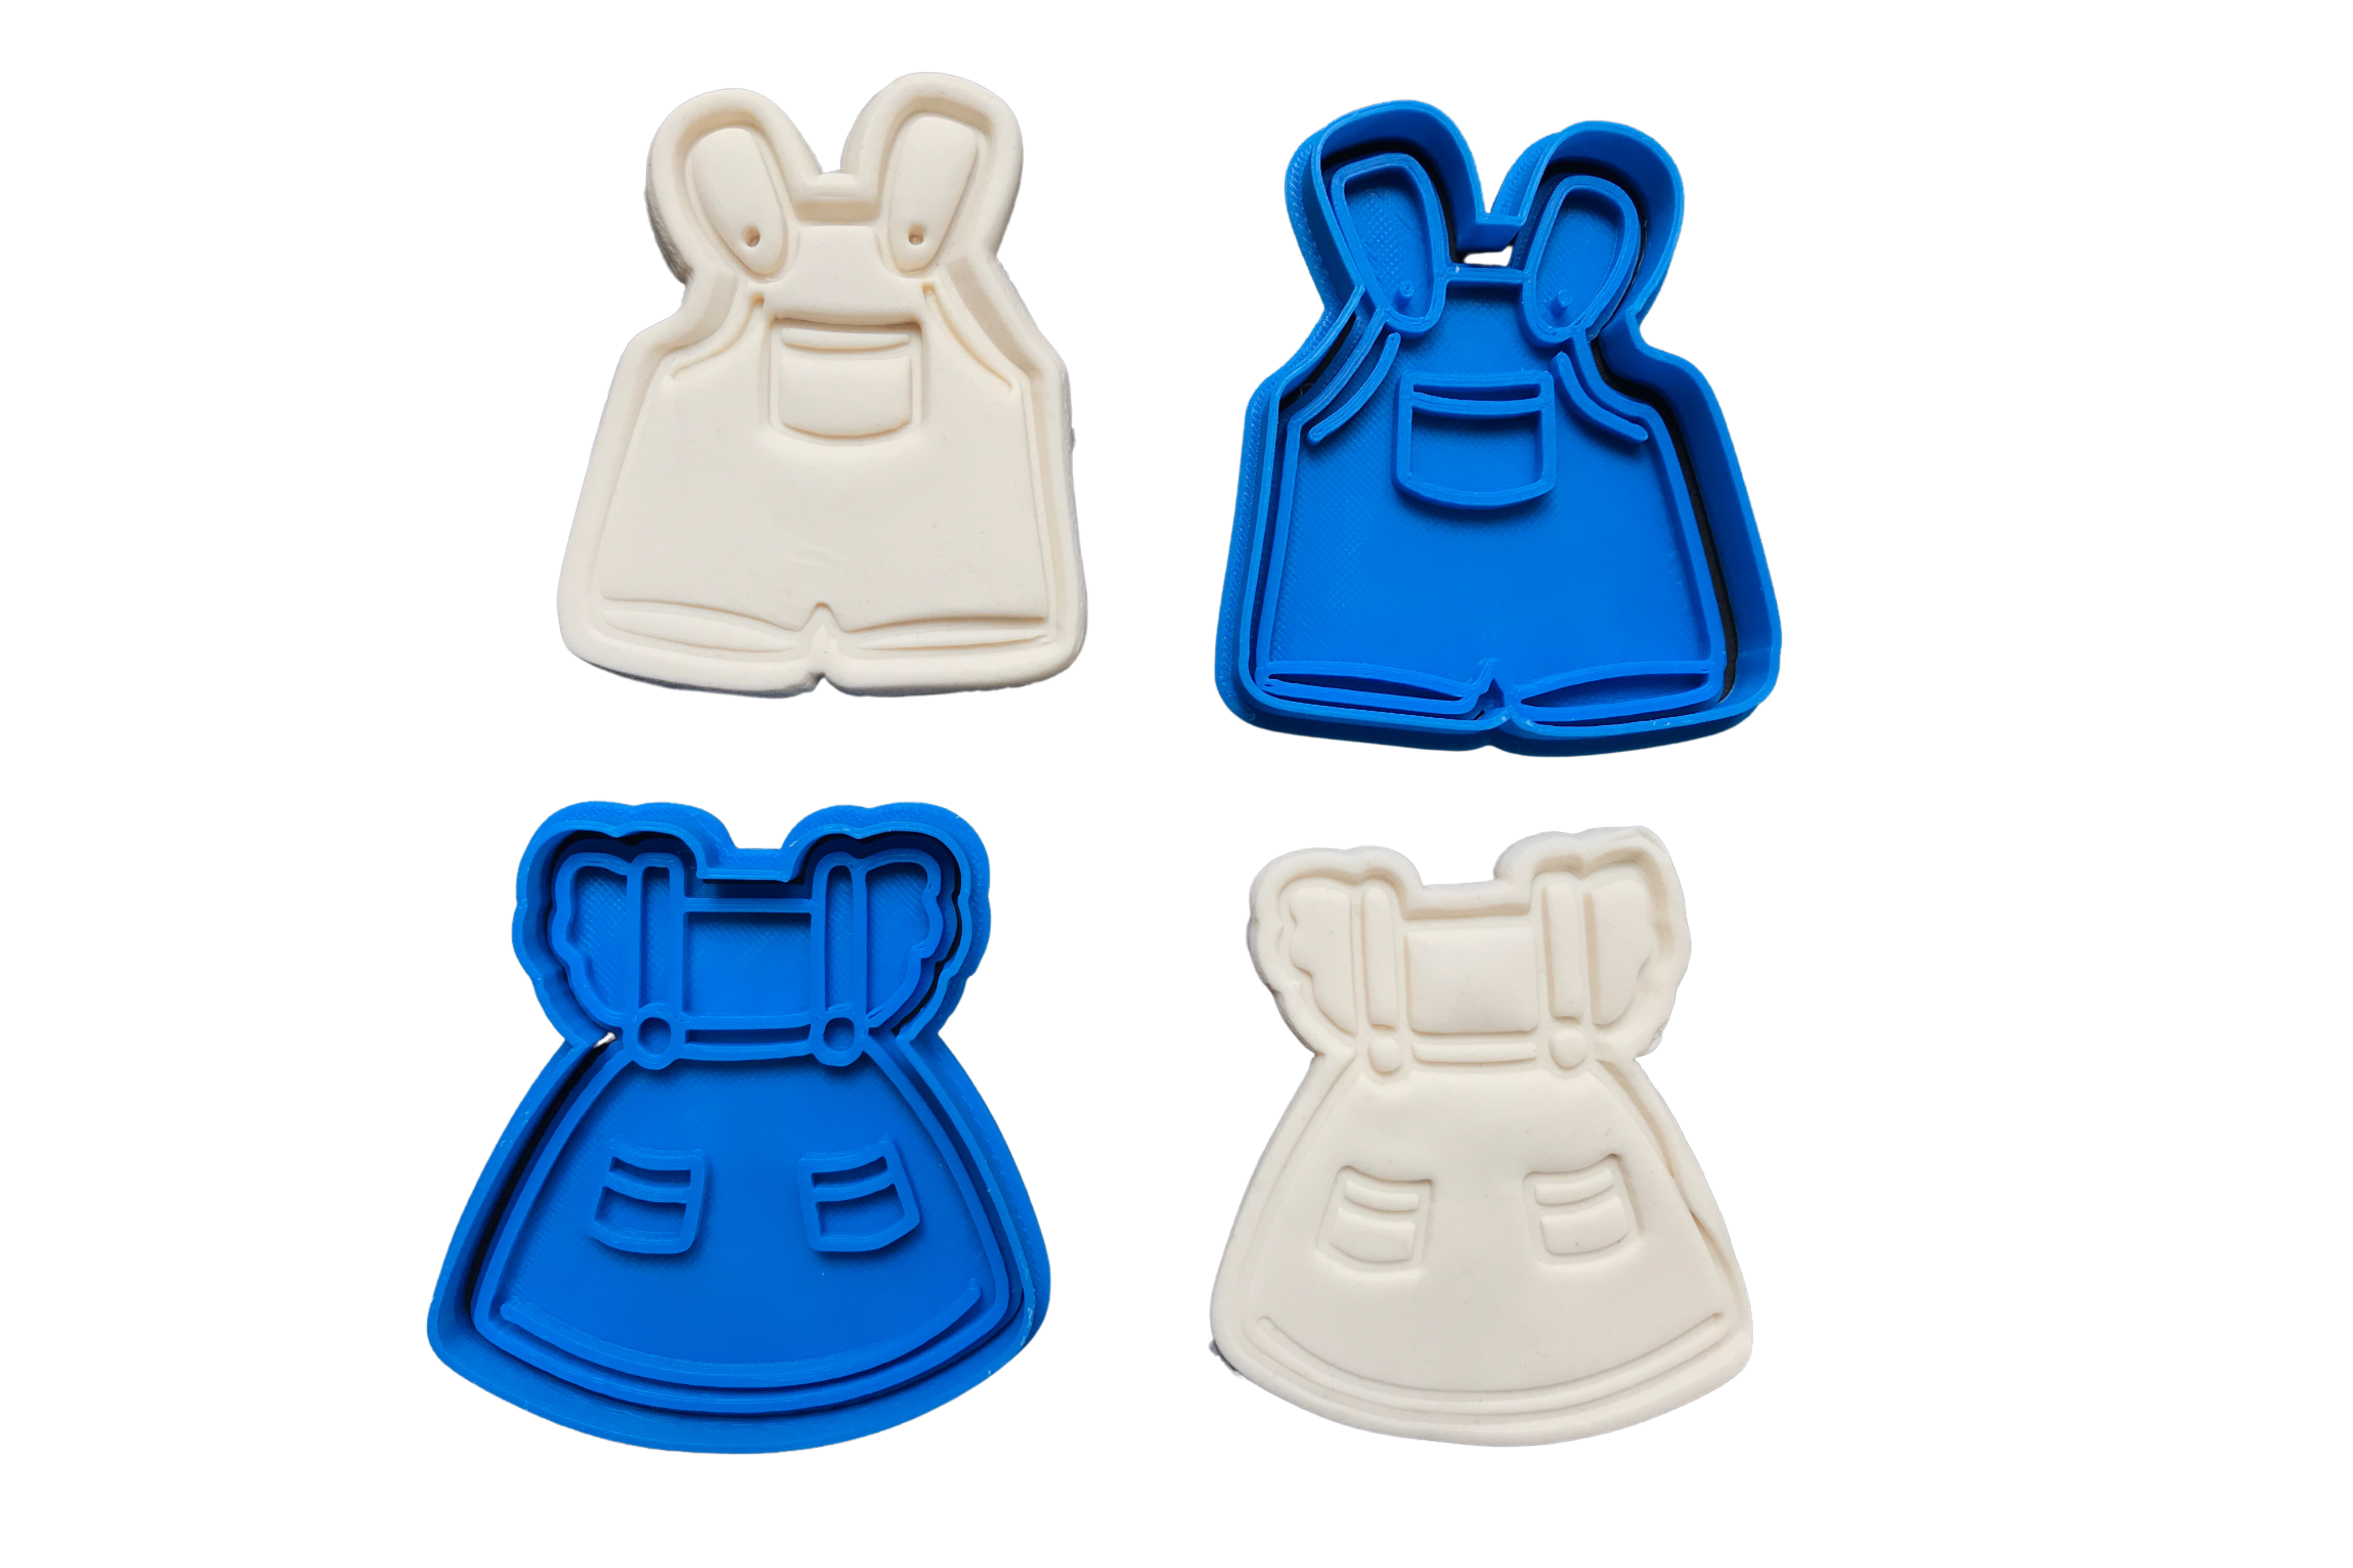 Lovely Sitting Baby Bear Cookie Cutter and Stamp for Baby Birthday